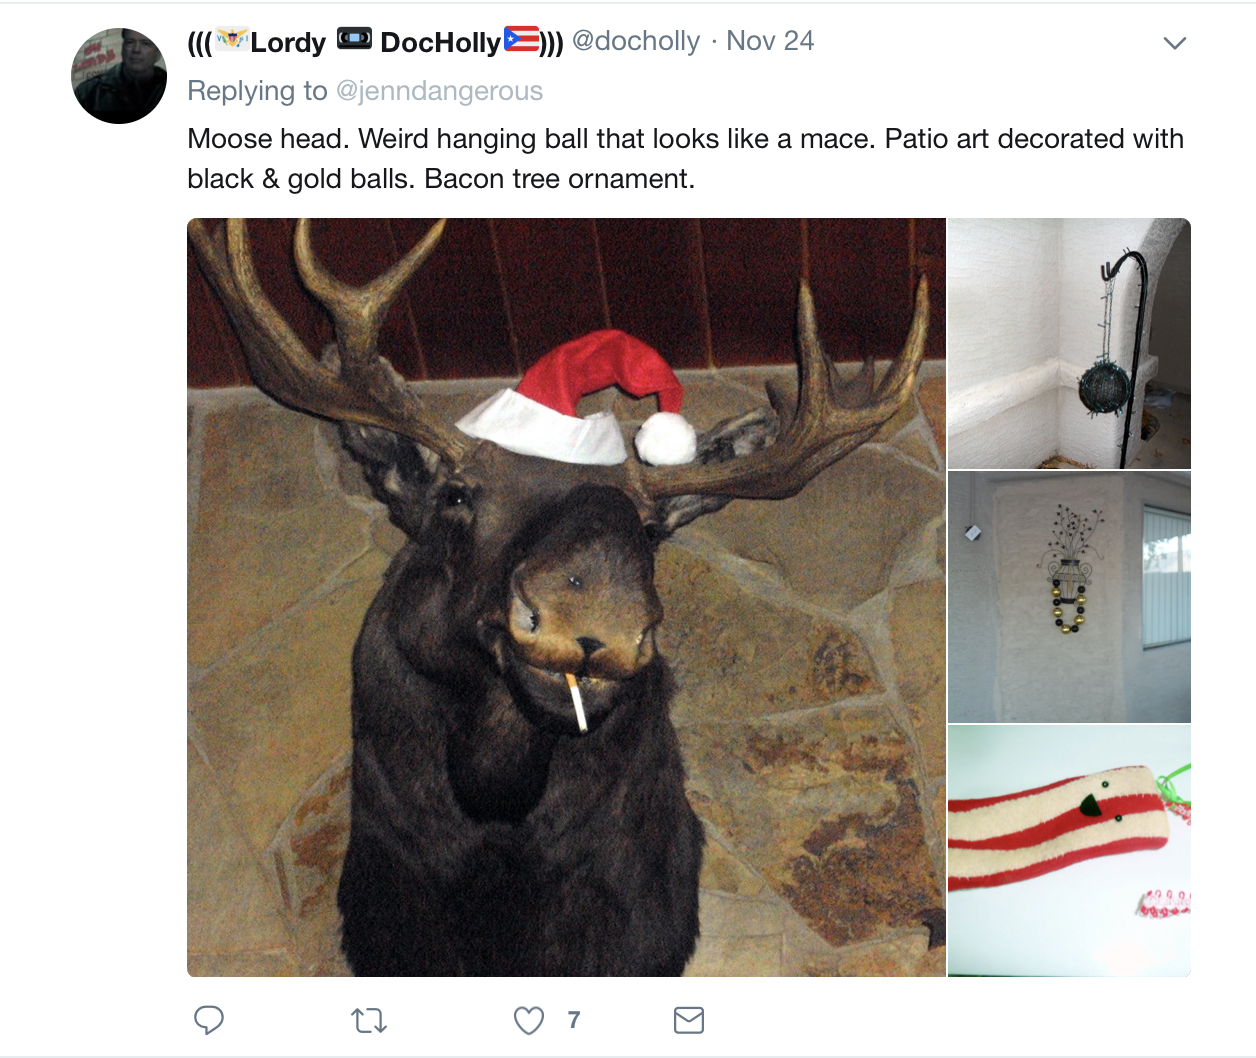 reindeer - Lordy DocHolly Nov 24 Moose head. Weird hanging ball that looks a mace. Patio art decorated with black & gold balls. Bacon tree ornament.